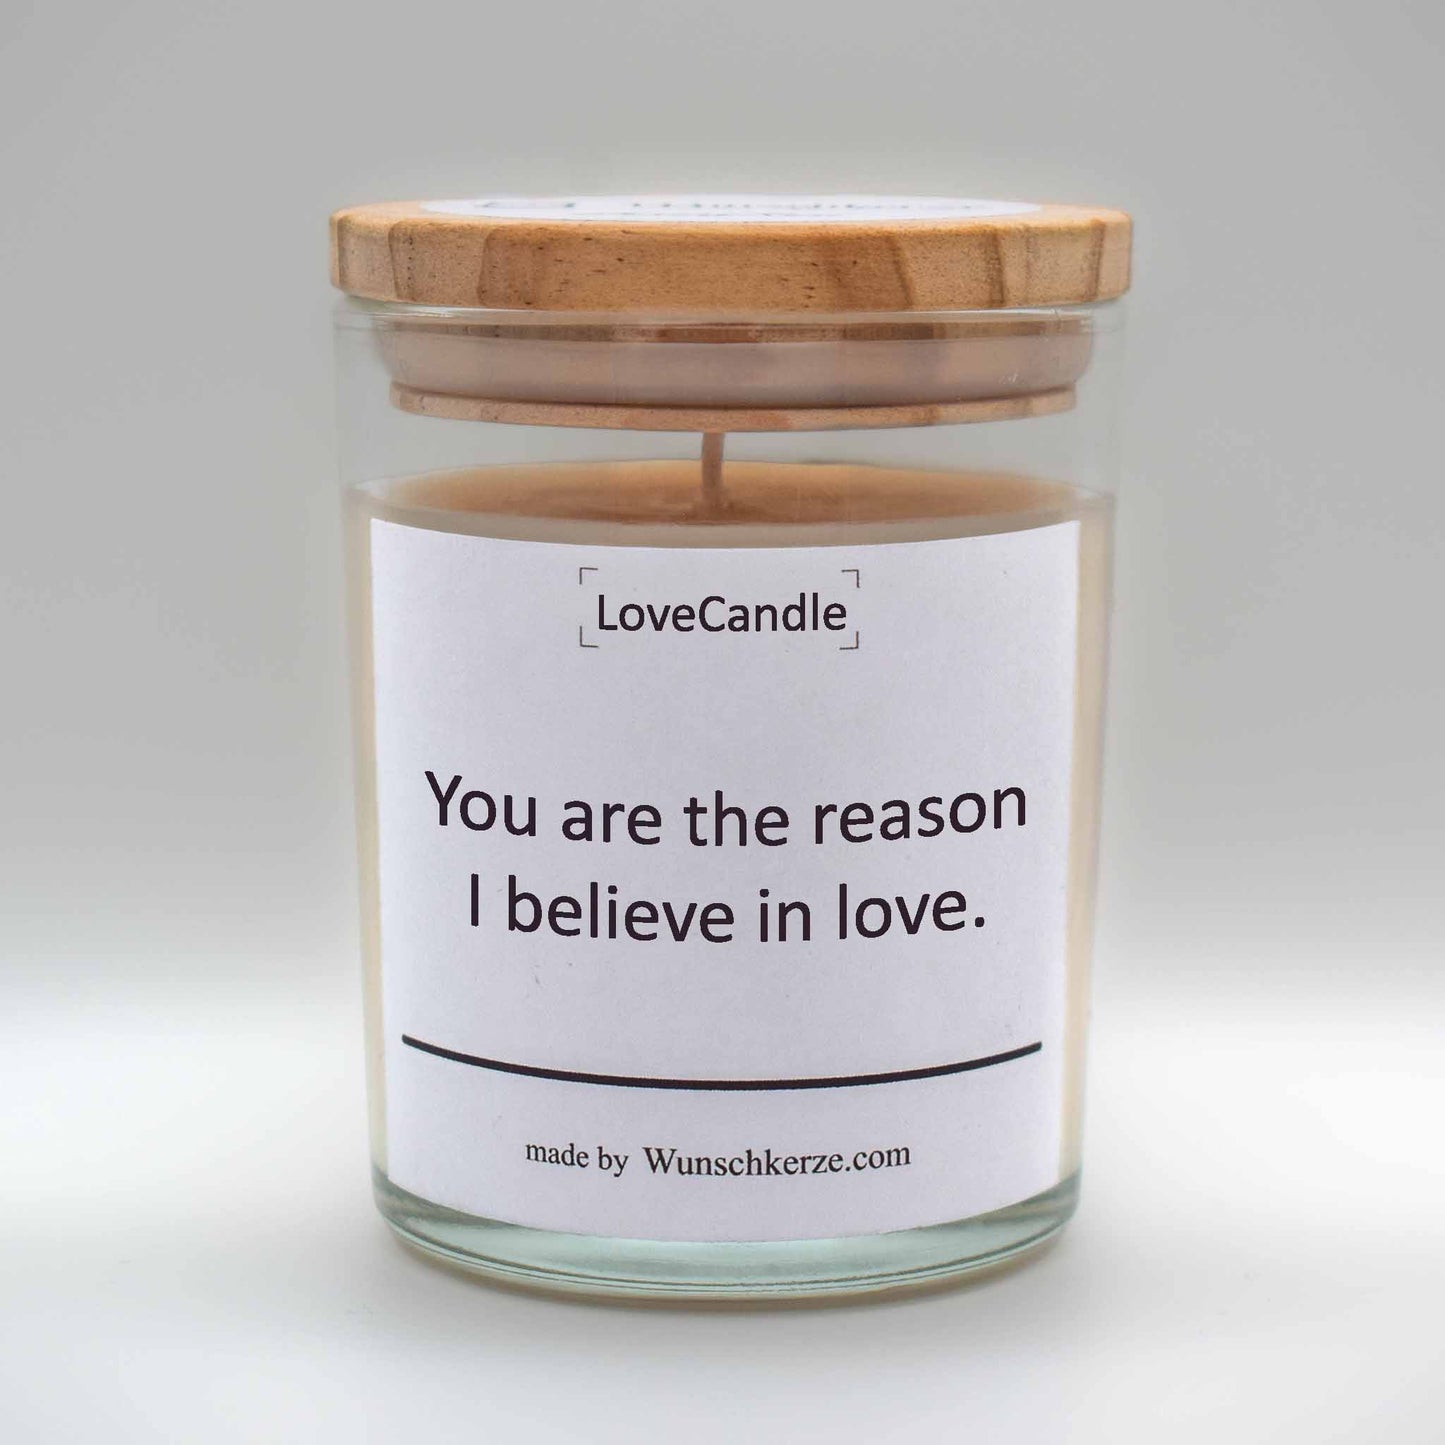 LoveCandle - You are the reason I believe in love.